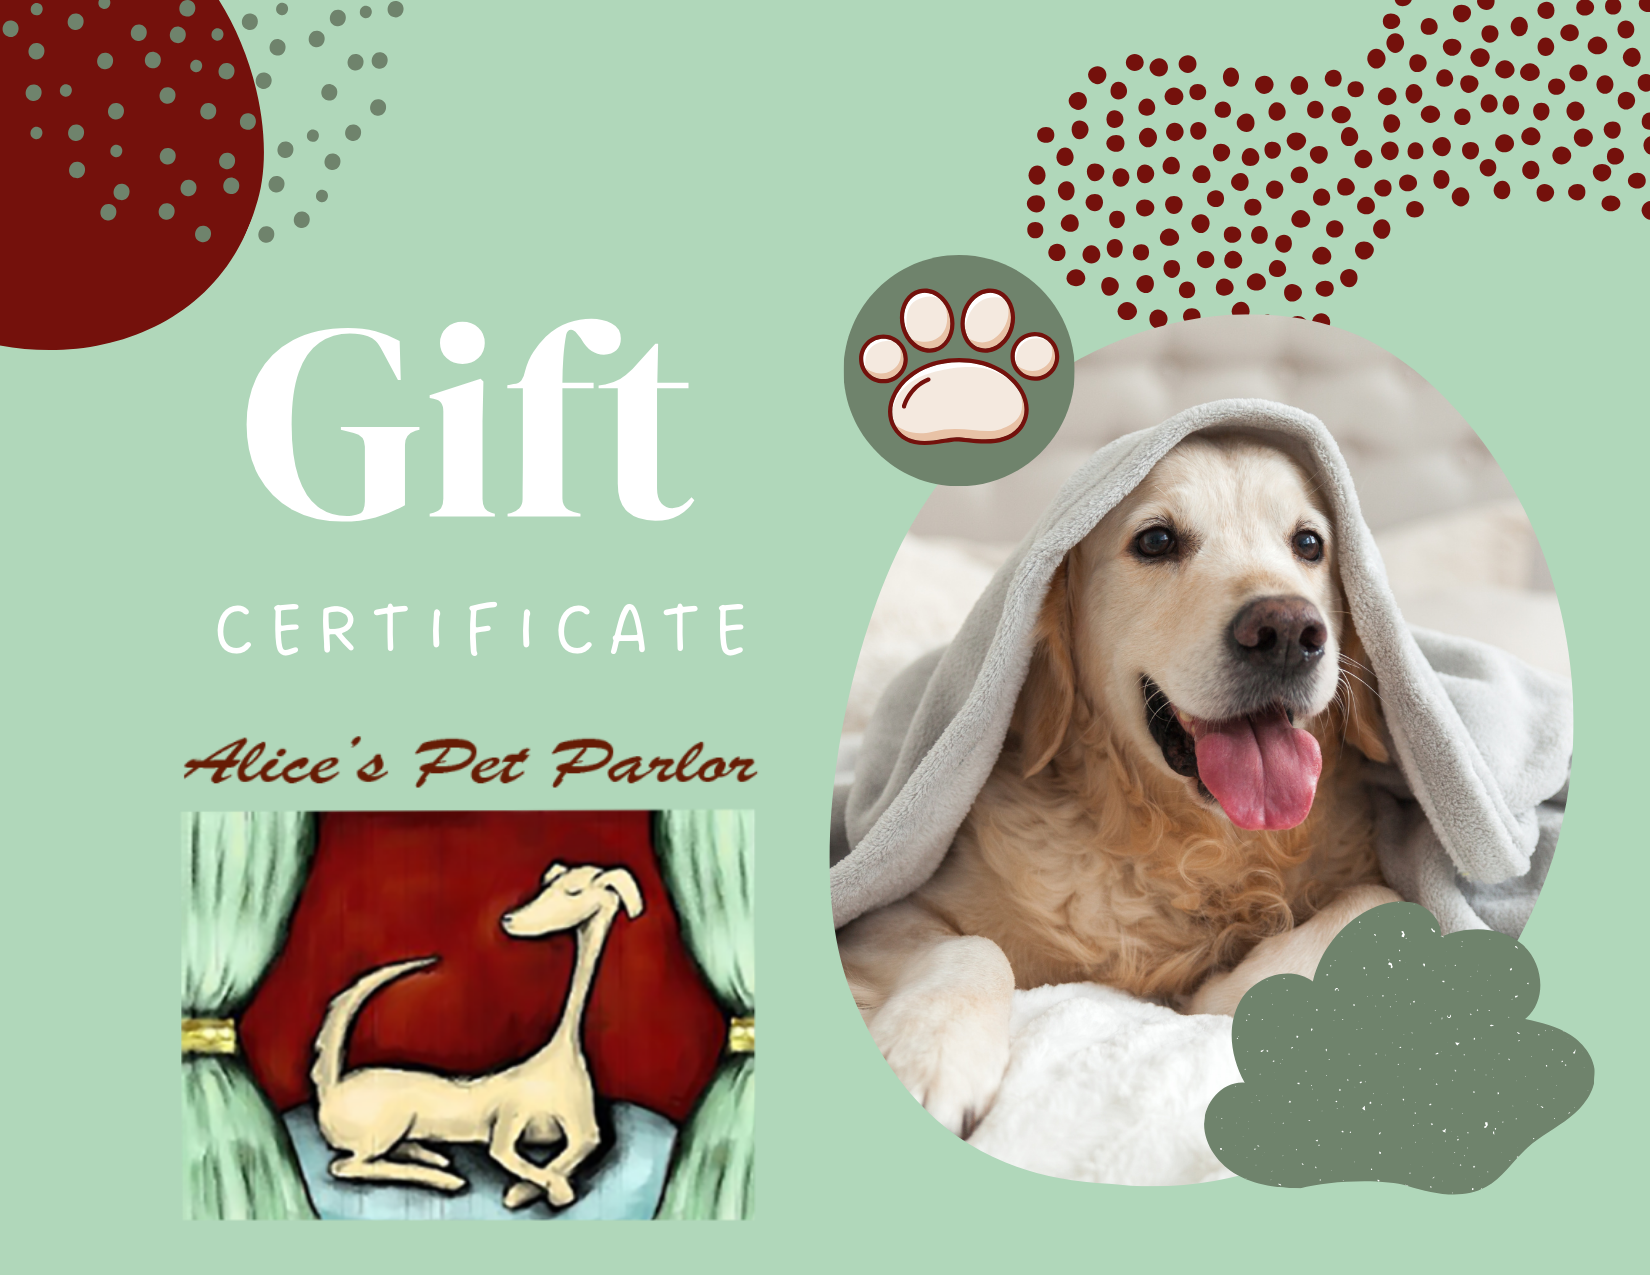 gift certificate for dog grooming dog under a towel